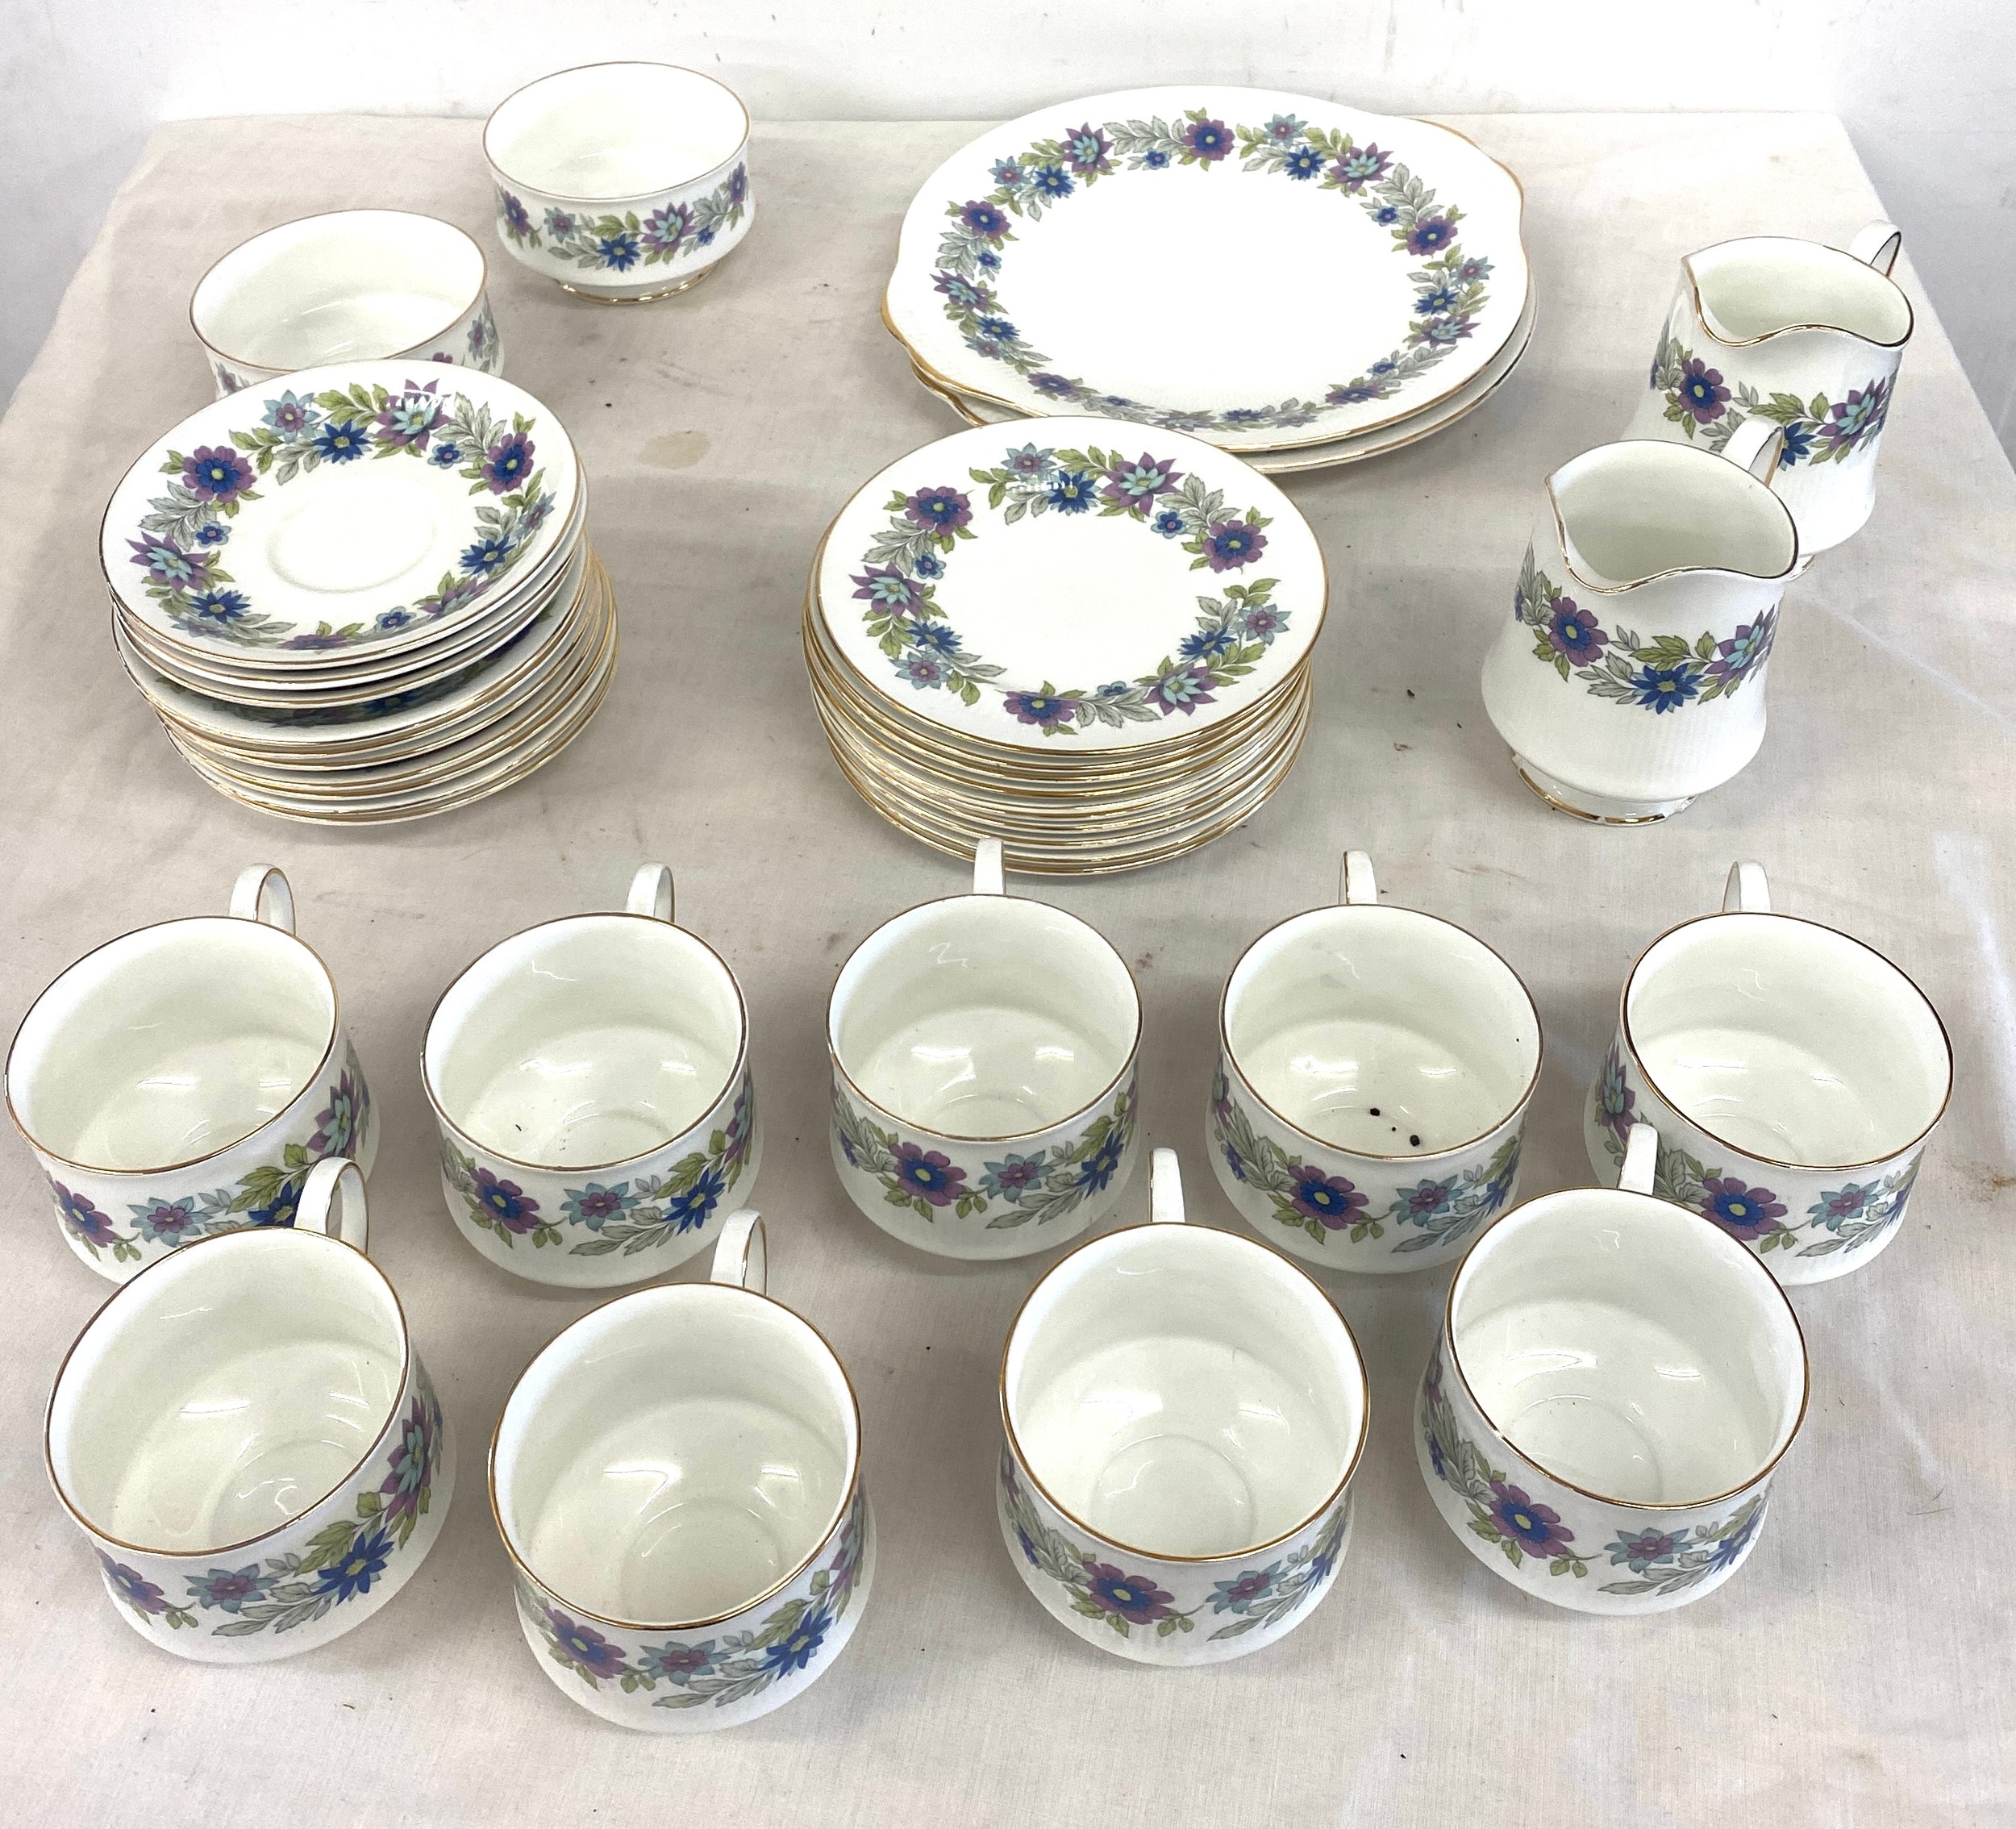 Paragon 10 place setting tea set, all in good overall condition